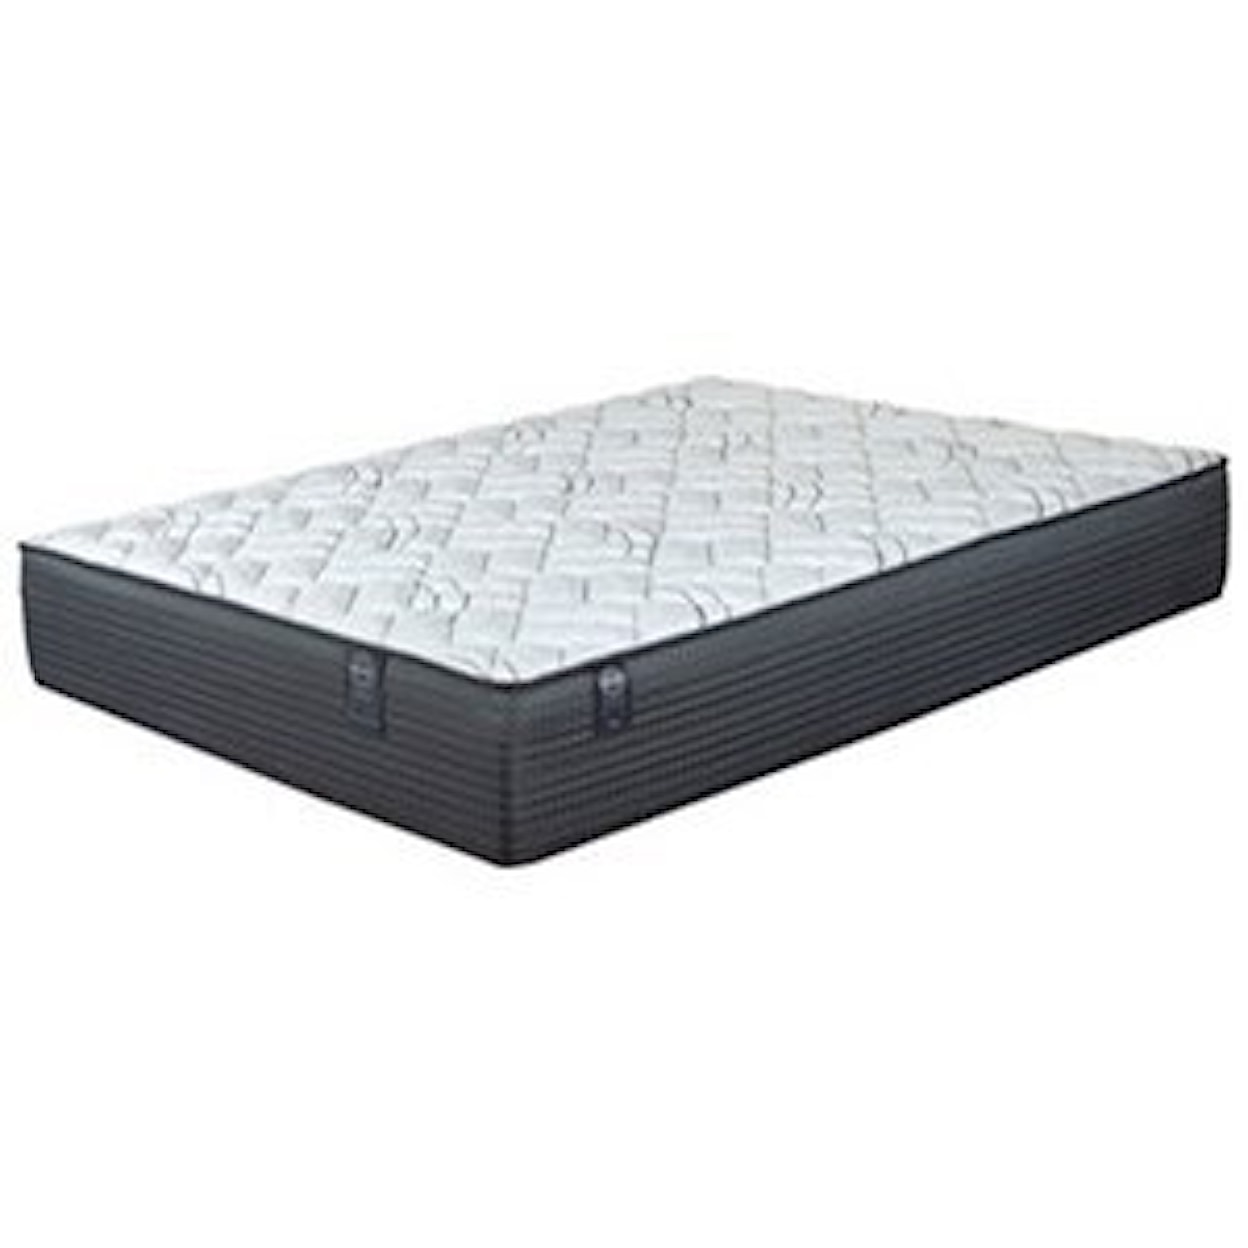 Restonic Duvall Firm Queen 14" Firm Two Sided Mattress